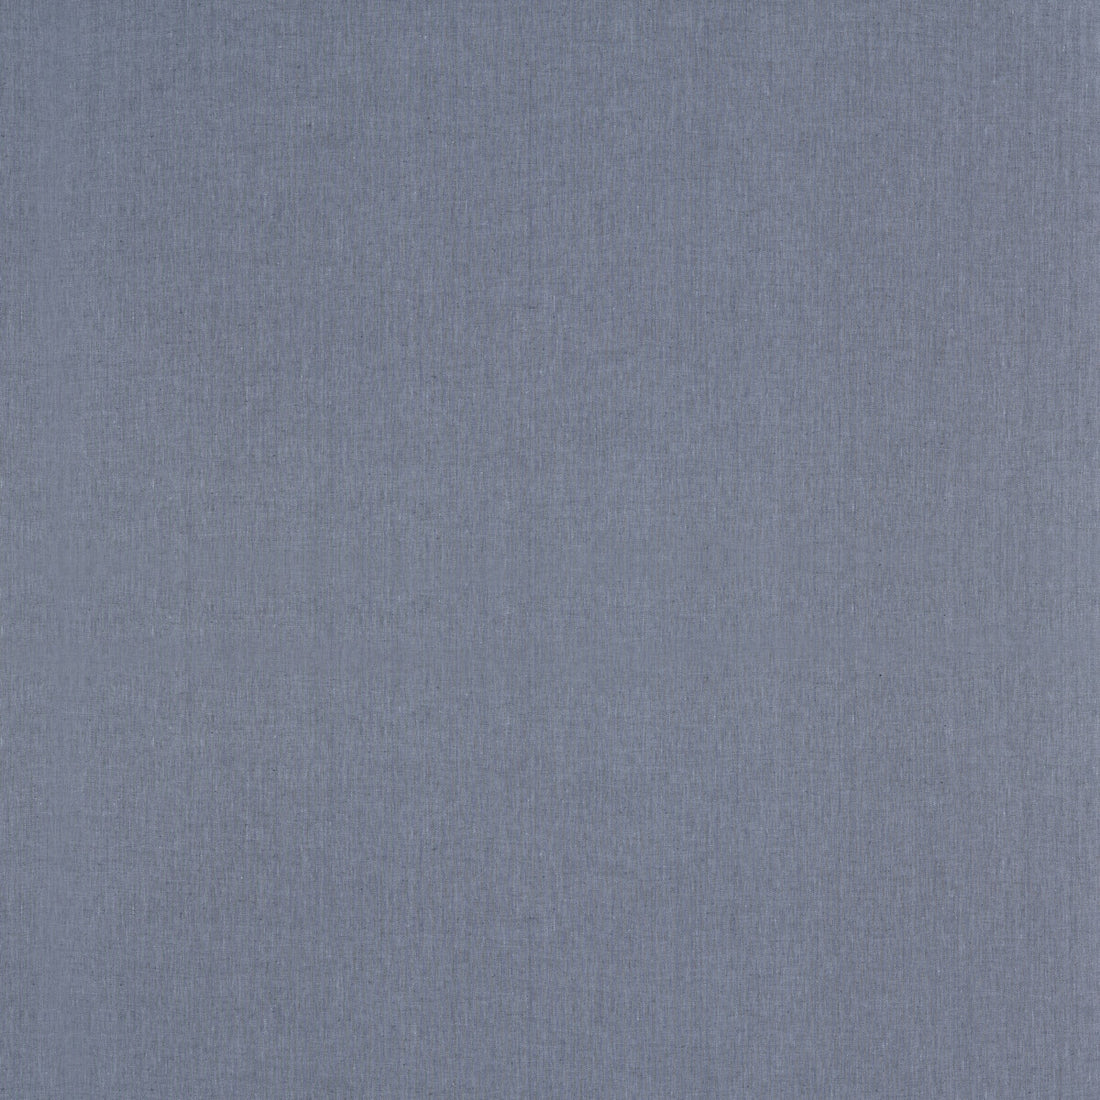 Sarsden fabric in denim color - pattern BF11039.640.0 - by G P &amp; J Baker in the Baker House Plain &amp; Stripe II collection